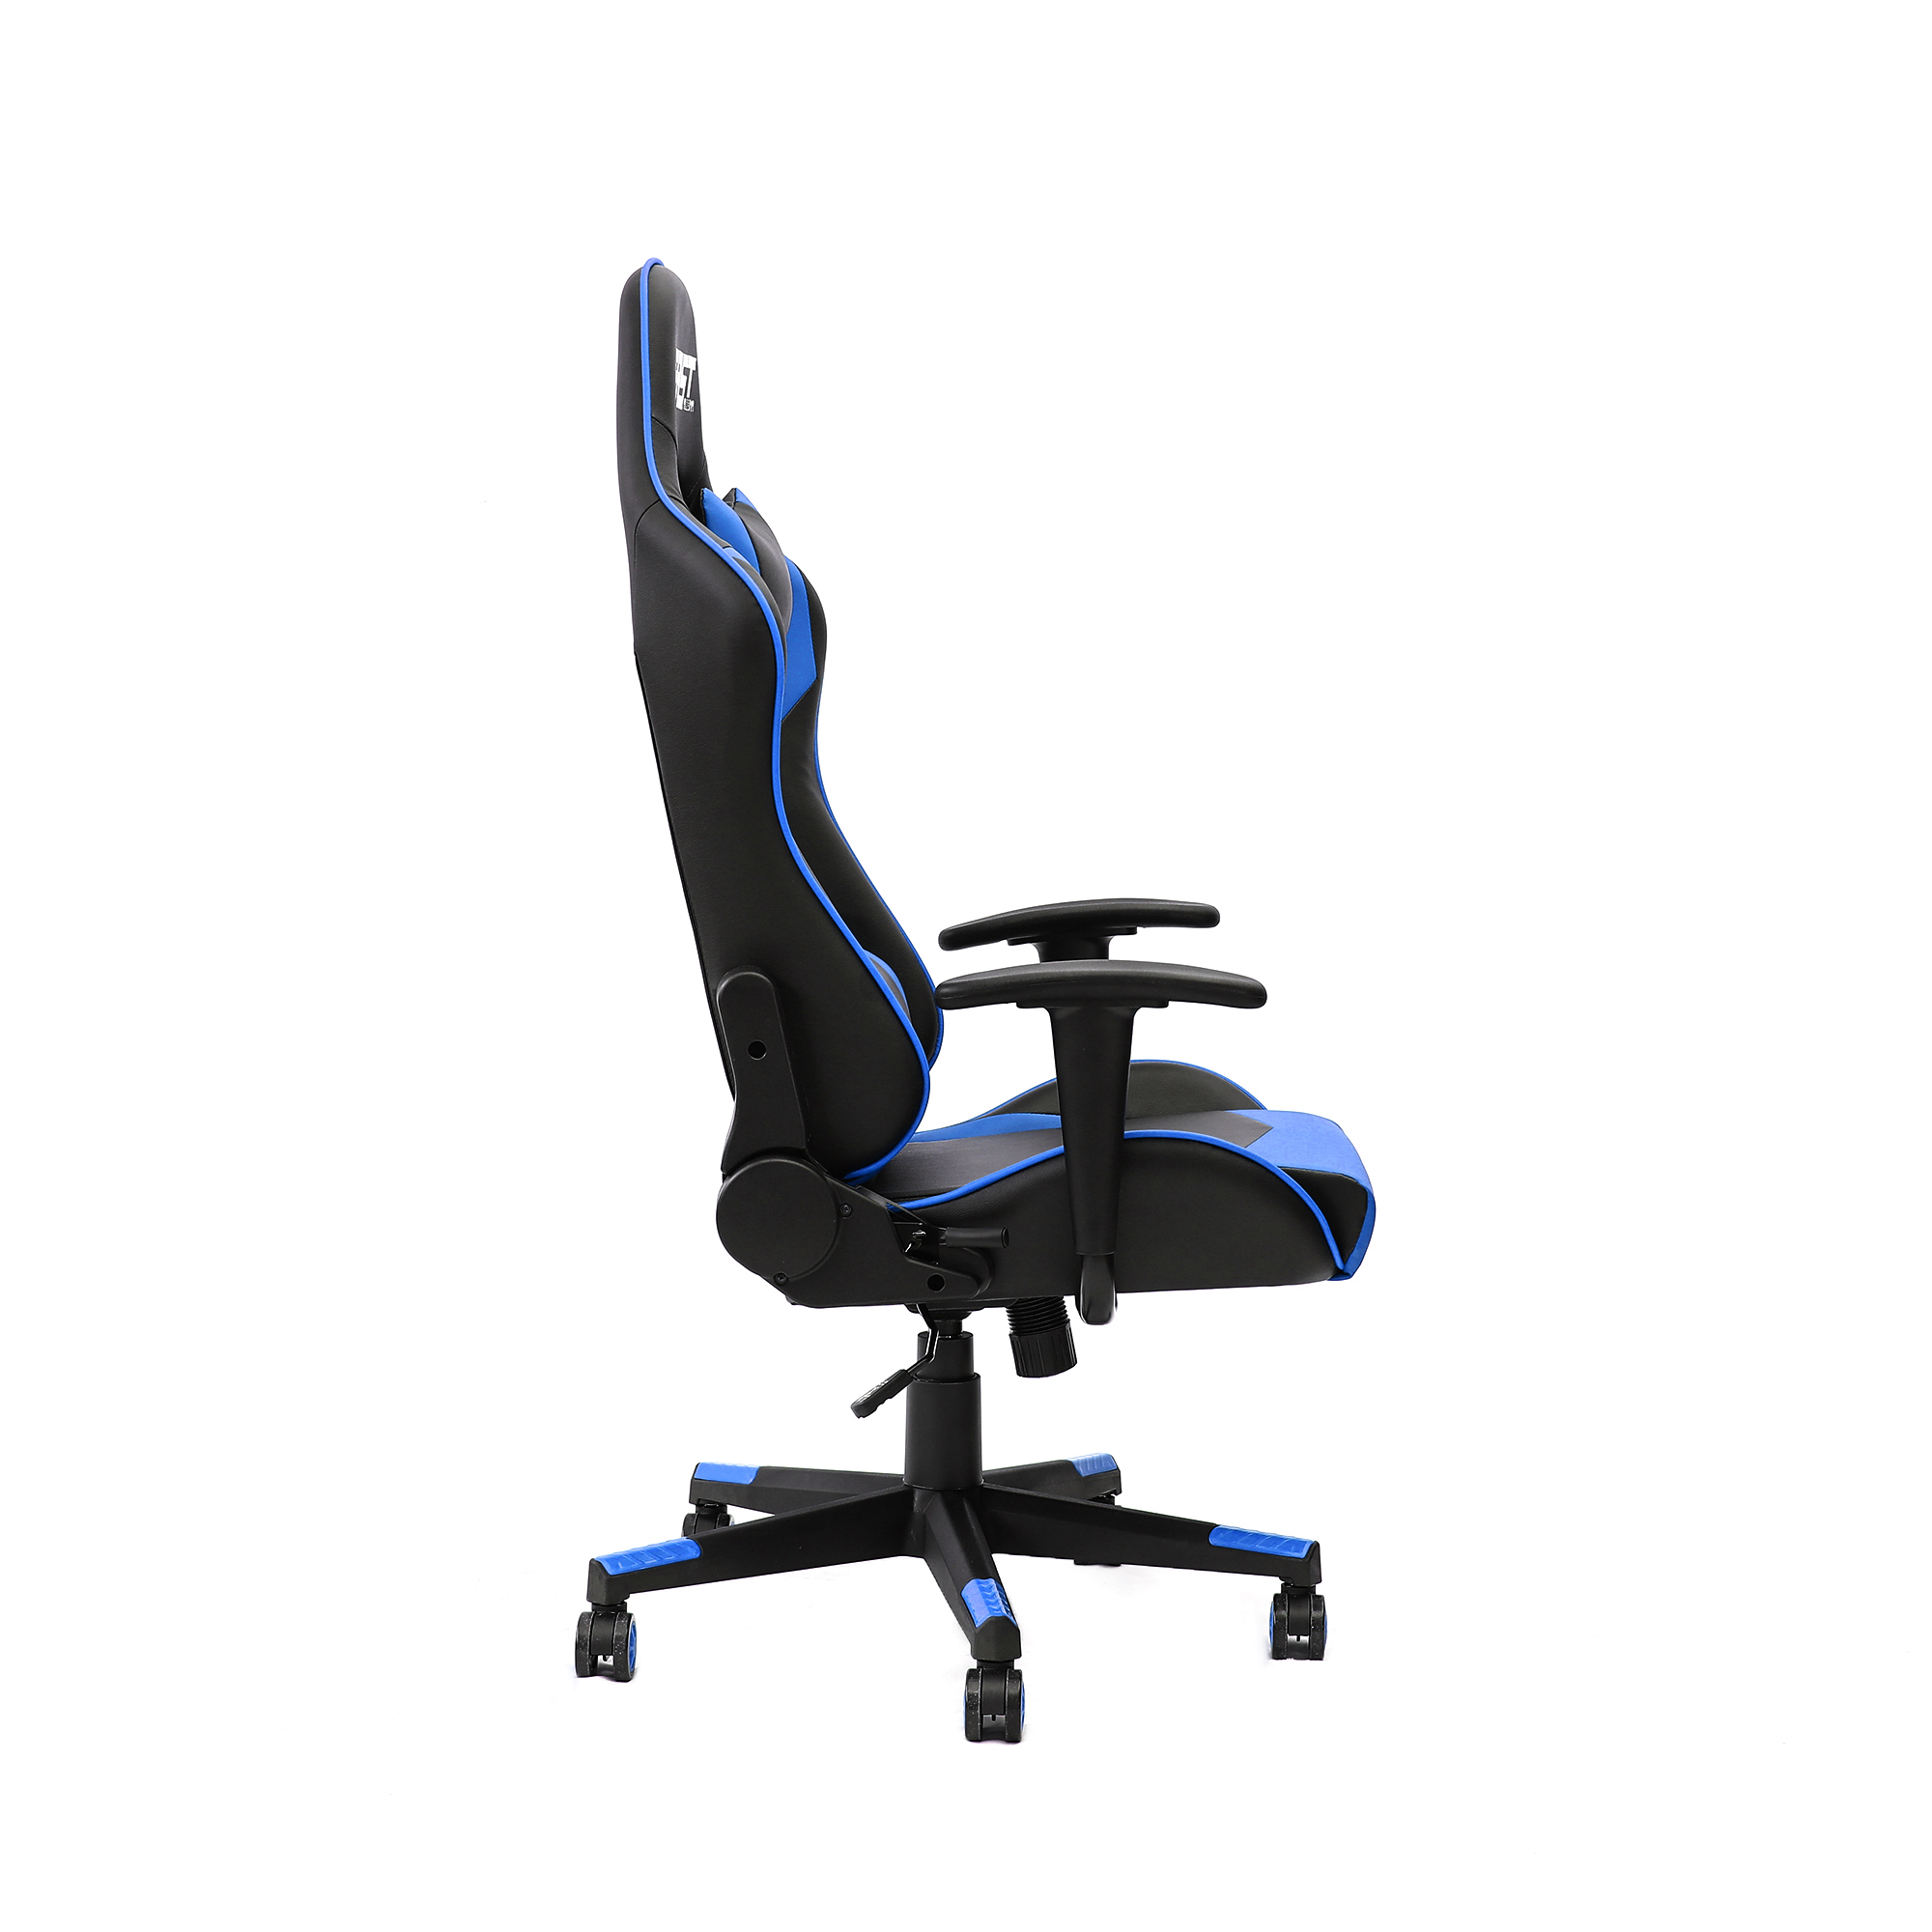 Silla Gamer Fast Blue Ergonómica Reclinable Cojines Oficina - 2020 home  Colombia